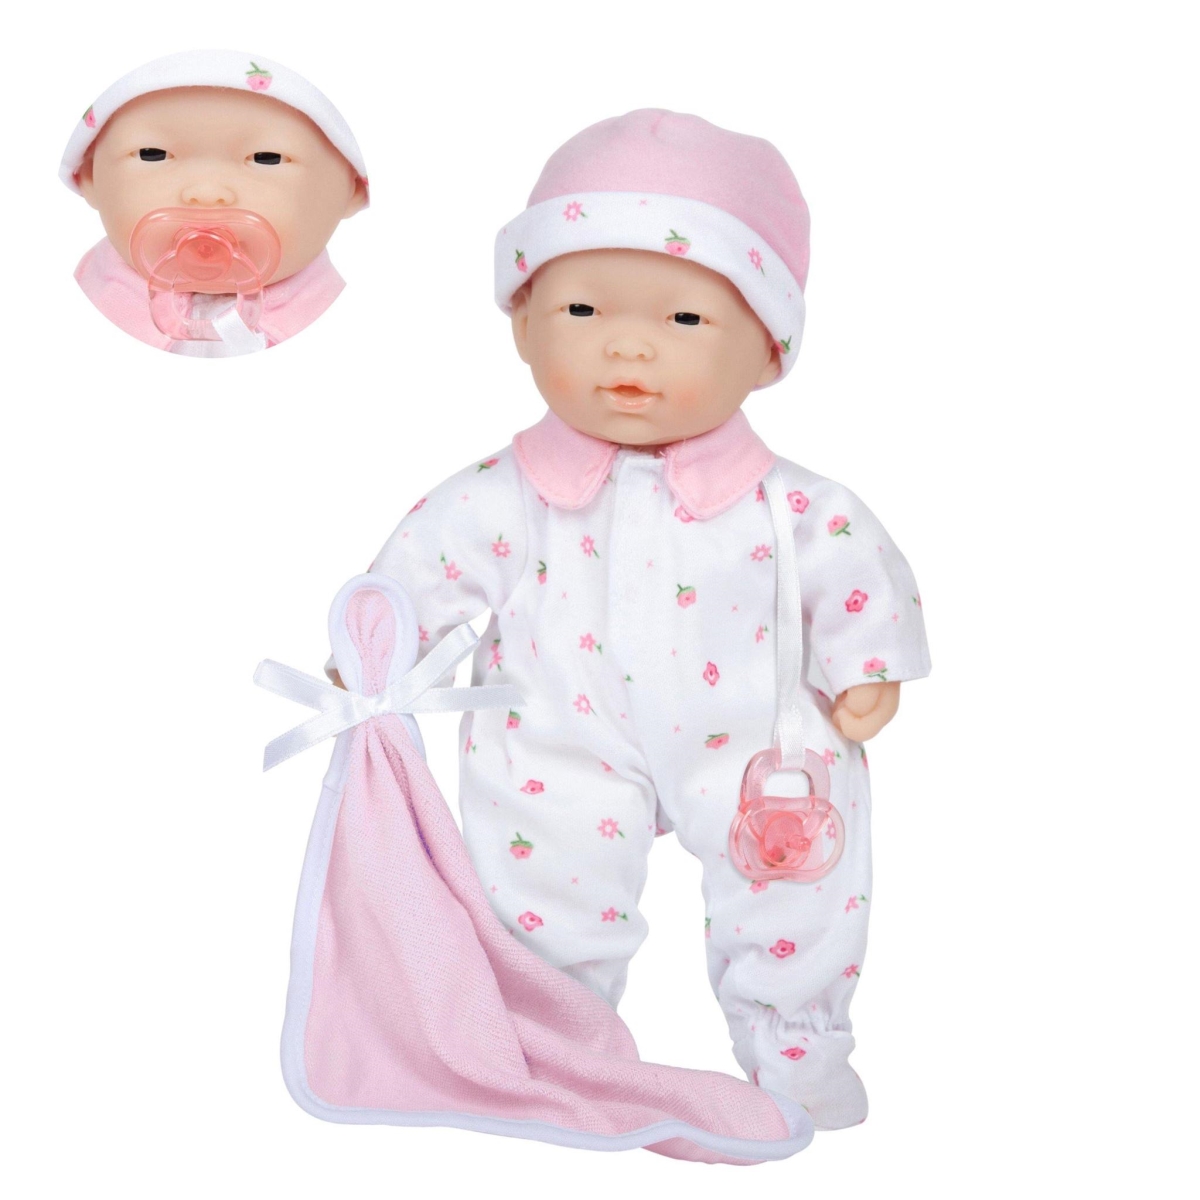 Picture of La Baby 11 in. Soft Body Asian Baby Doll in Pink Outfit